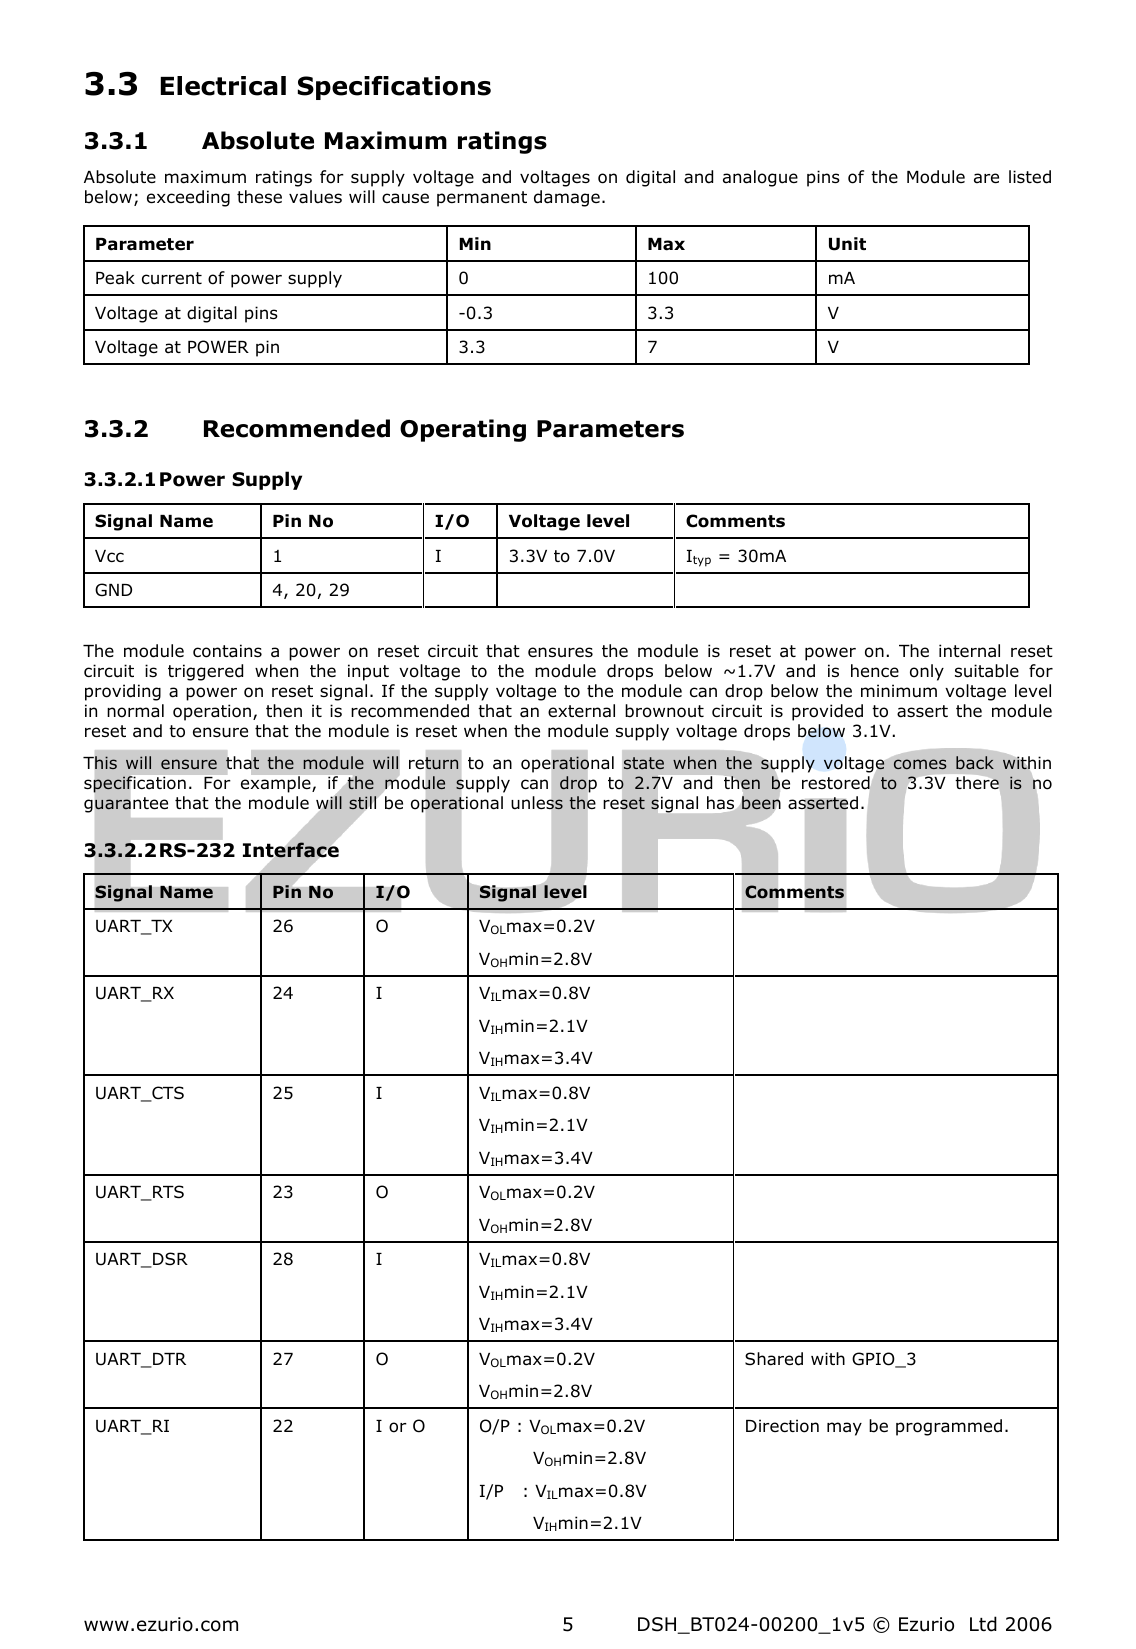  www.ezurio.com  DSH_BT024-00200_1v5 © Ezurio  Ltd 2006 5 3.3 Electrical Specifications 3.3.1 Absolute Maximum ratings Absolute maximum ratings for supply voltage and voltages on digital and analogue pins of the Module are listed below; exceeding these values will cause permanent damage. Parameter  Min  Max  Unit Peak current of power supply  0  100  mA Voltage at digital pins  -0.3  3.3  V Voltage at POWER pin  3.3   7  V  3.3.2 Recommended Operating Parameters 3.3.2.1 Power Supply Signal Name  Pin No  I/O  Voltage level  Comments Vcc  1  I  3.3V to 7.0V  Ityp = 30mA GND  4, 20, 29        The module  contains a  power  on  reset circuit  that ensures  the module  is  reset  at  power  on. The  internal  reset circuit  is  triggered  when  the  input  voltage  to  the  module  drops  below  ~1.7V  and  is  hence  only  suitable  for providing a power on reset signal. If the supply voltage to the module can drop below the minimum voltage level in normal operation, then it is  recommended that an external brownout circuit is  provided to assert  the  module reset and to ensure that the module is reset when the module supply voltage drops below 3.1V.  This will ensure  that the  module will  return to  an operational state  when  the supply  voltage  comes  back within specification.  For  example,  if  the  module  supply  can  drop  to  2.7V  and  then  be  restored  to  3.3V  there  is  no guarantee that the module will still be operational unless the reset signal has been asserted. 3.3.2.2 RS-232 Interface Signal Name  Pin No  I/O  Signal level  Comments UART_TX  26  O  VOLmax=0.2V VOHmin=2.8V  UART_RX  24  I  VILmax=0.8V VIHmin=2.1V VIHmax=3.4V  UART_CTS  25  I  VILmax=0.8V VIHmin=2.1V VIHmax=3.4V  UART_RTS  23  O  VOLmax=0.2V VOHmin=2.8V  UART_DSR  28  I  VILmax=0.8V VIHmin=2.1V VIHmax=3.4V  UART_DTR  27  O  VOLmax=0.2V VOHmin=2.8V Shared with GPIO_3 UART_RI  22  I or O  O/P : VOLmax=0.2V          VOHmin=2.8V  I/P   : VILmax=0.8V          VIHmin=2.1V Direction may be programmed.  